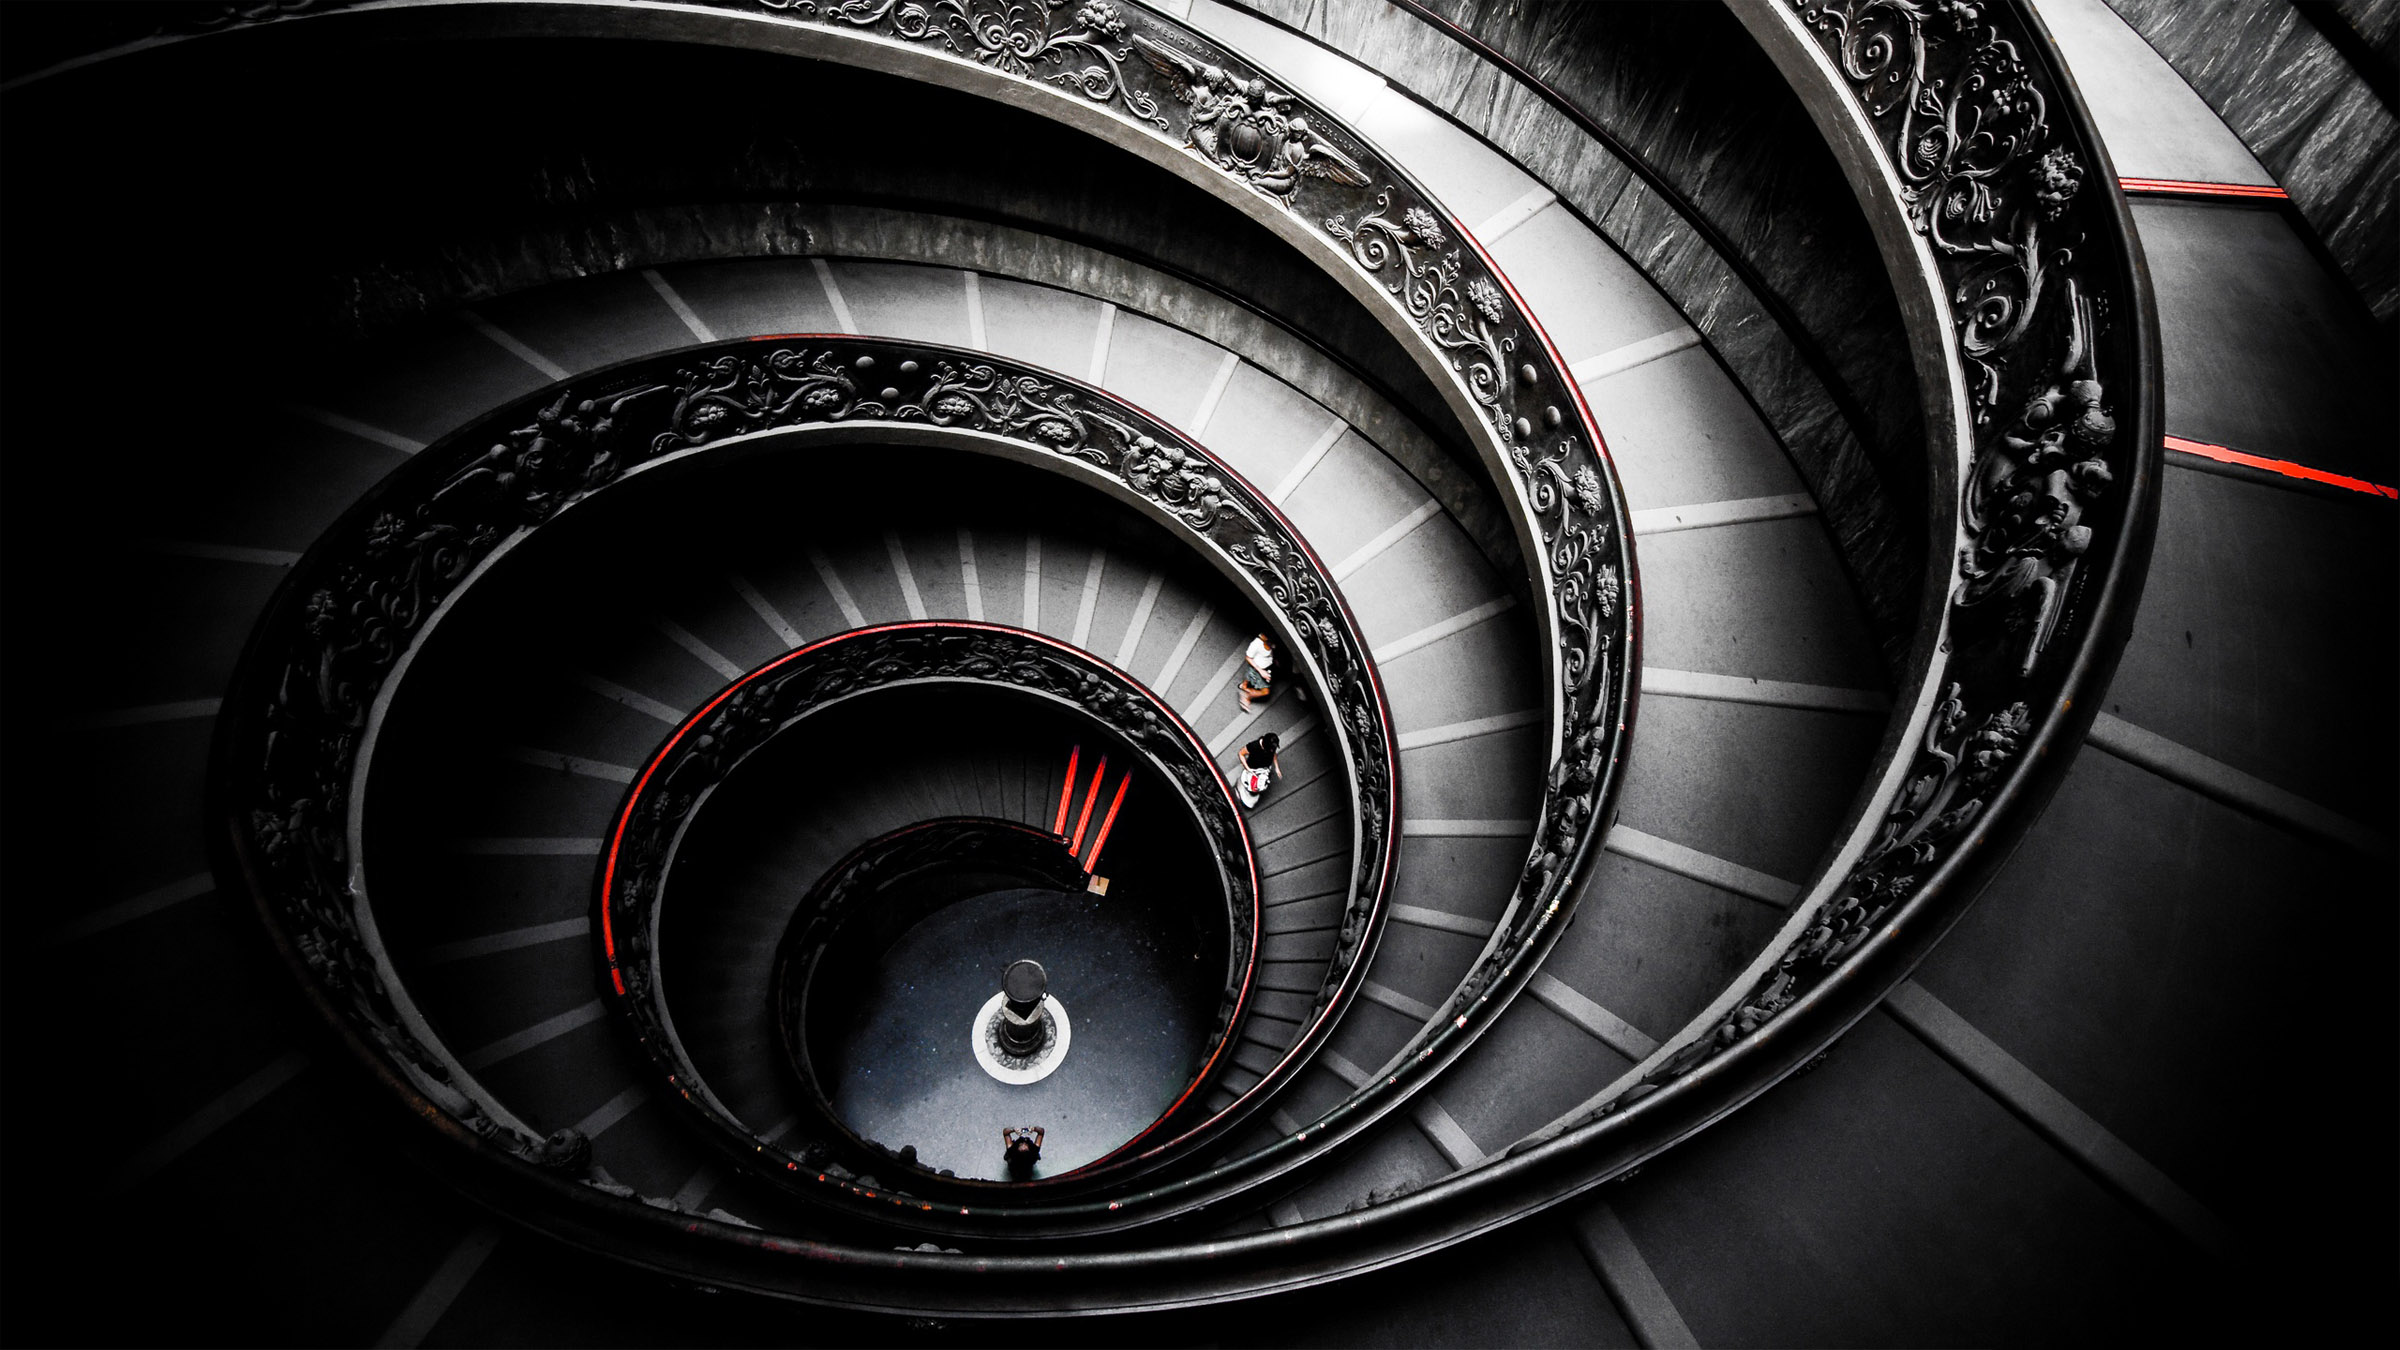 General 2400x1350 stairs monochrome selective coloring circle architecture Vatican City Rome Italy